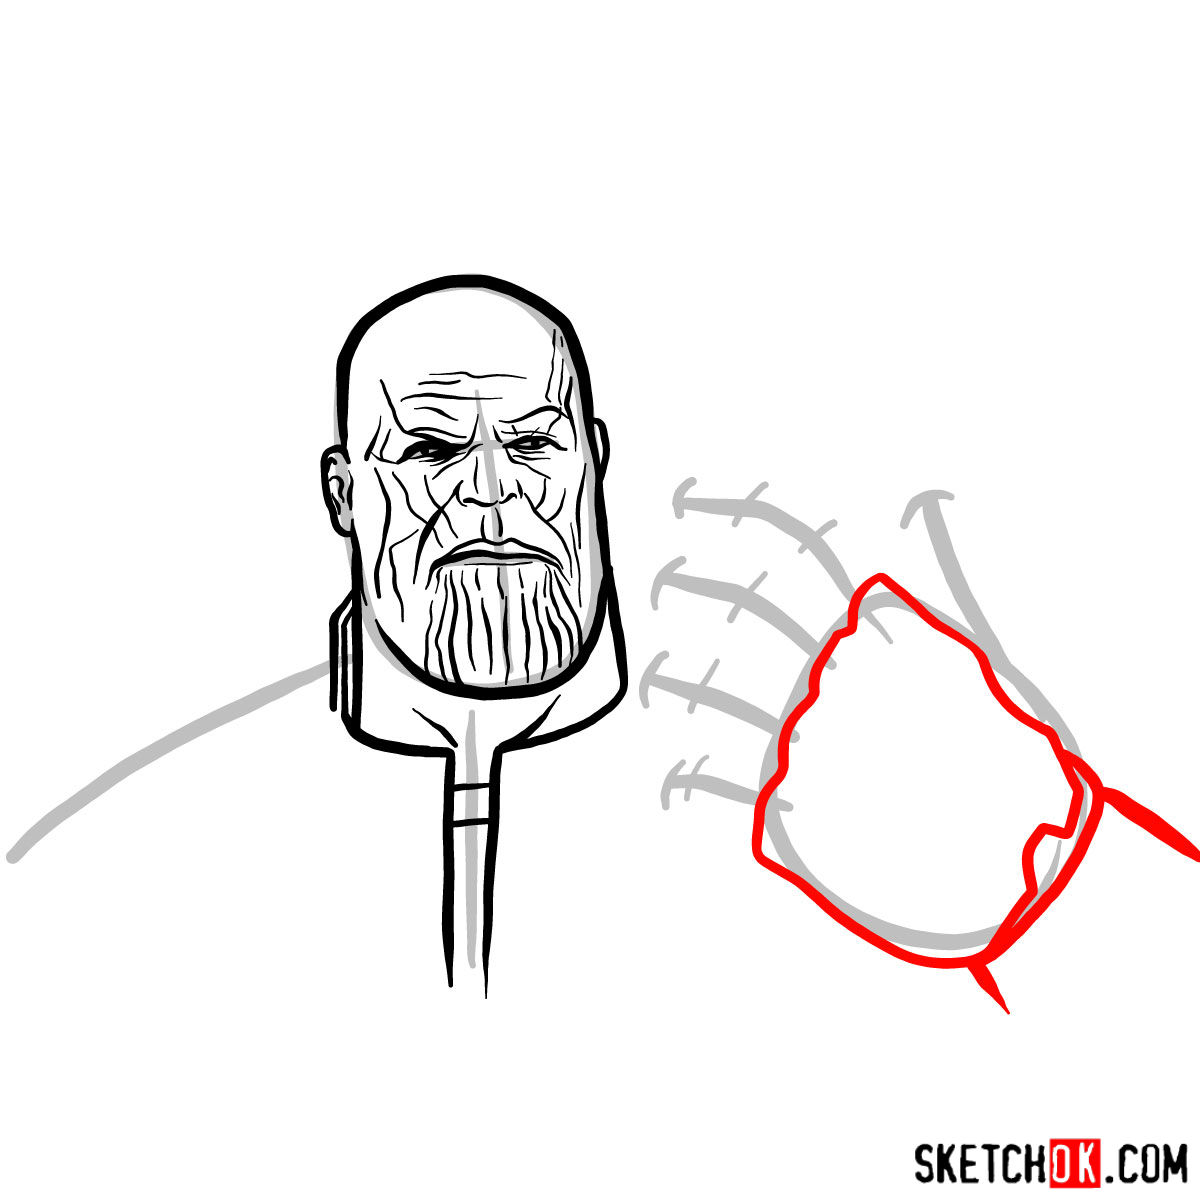 How to draw Thanos from the Avengers: Infinity War 2018 film - step 09